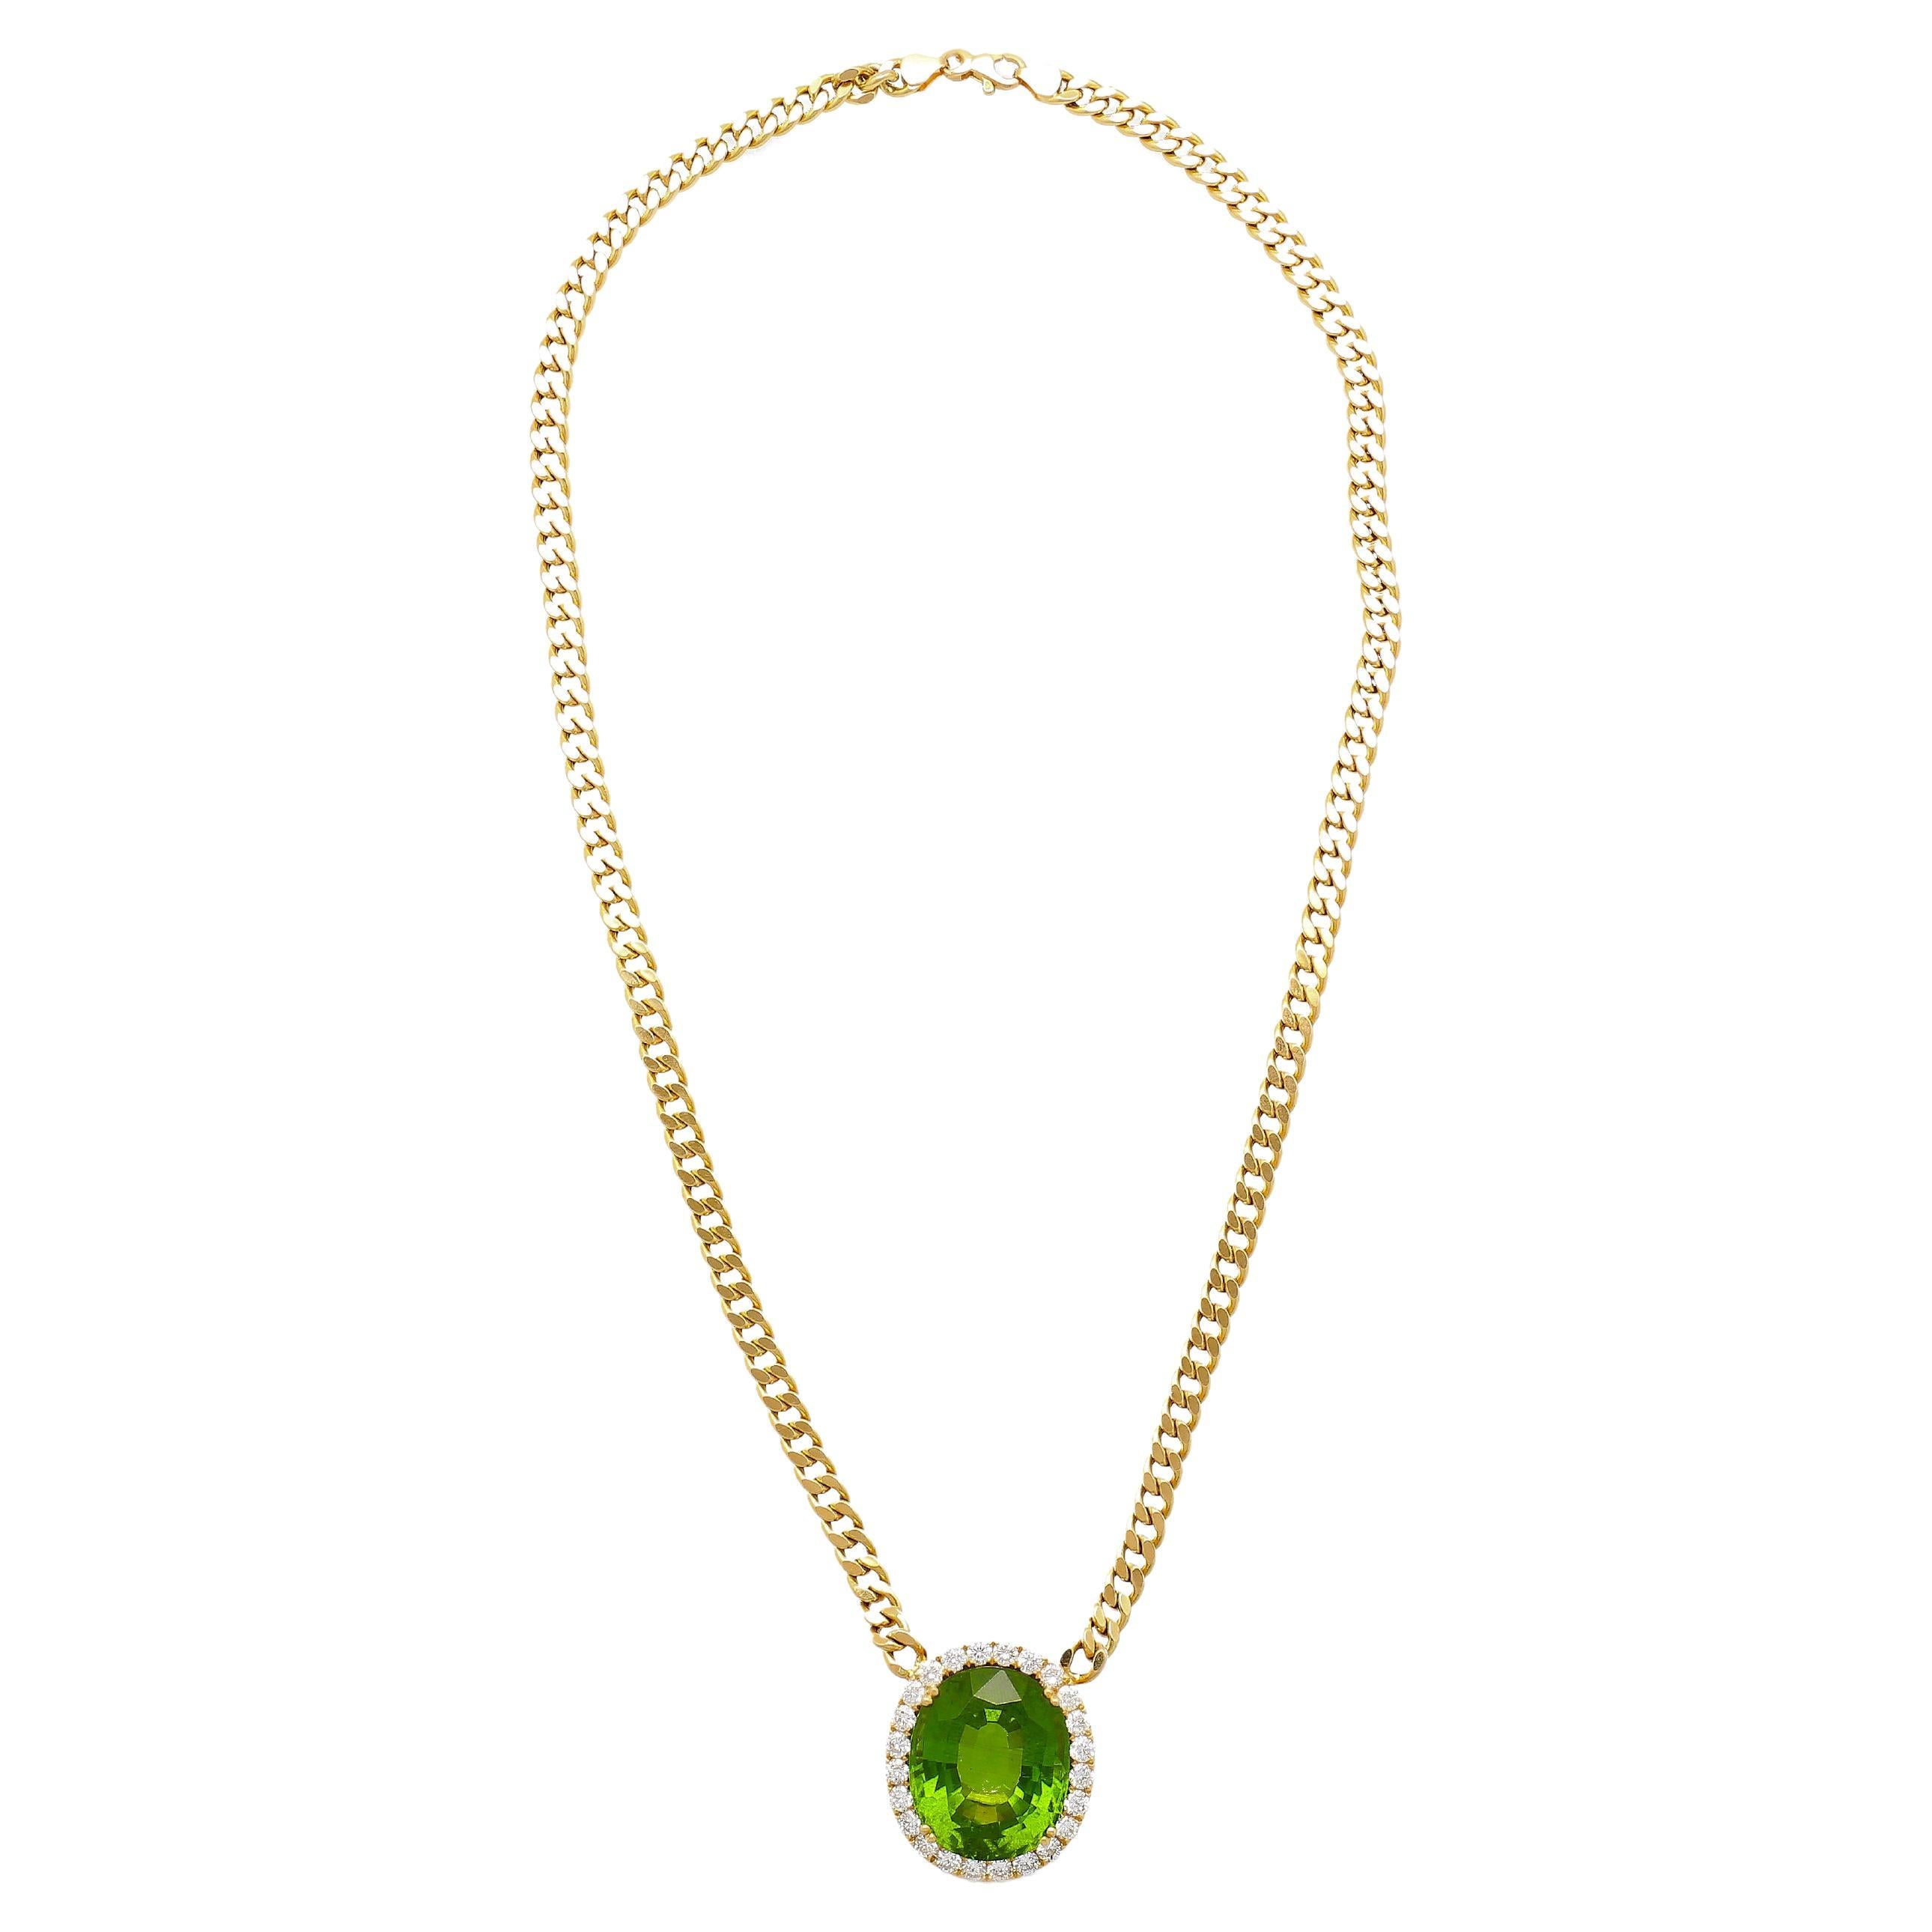 Featuring a GRS certified 51 carat green oval cut peridot embraced by a diamond halo, the pendant is exquisitely crafted in an 18K yellow and white gold setting. Suspended from a 22